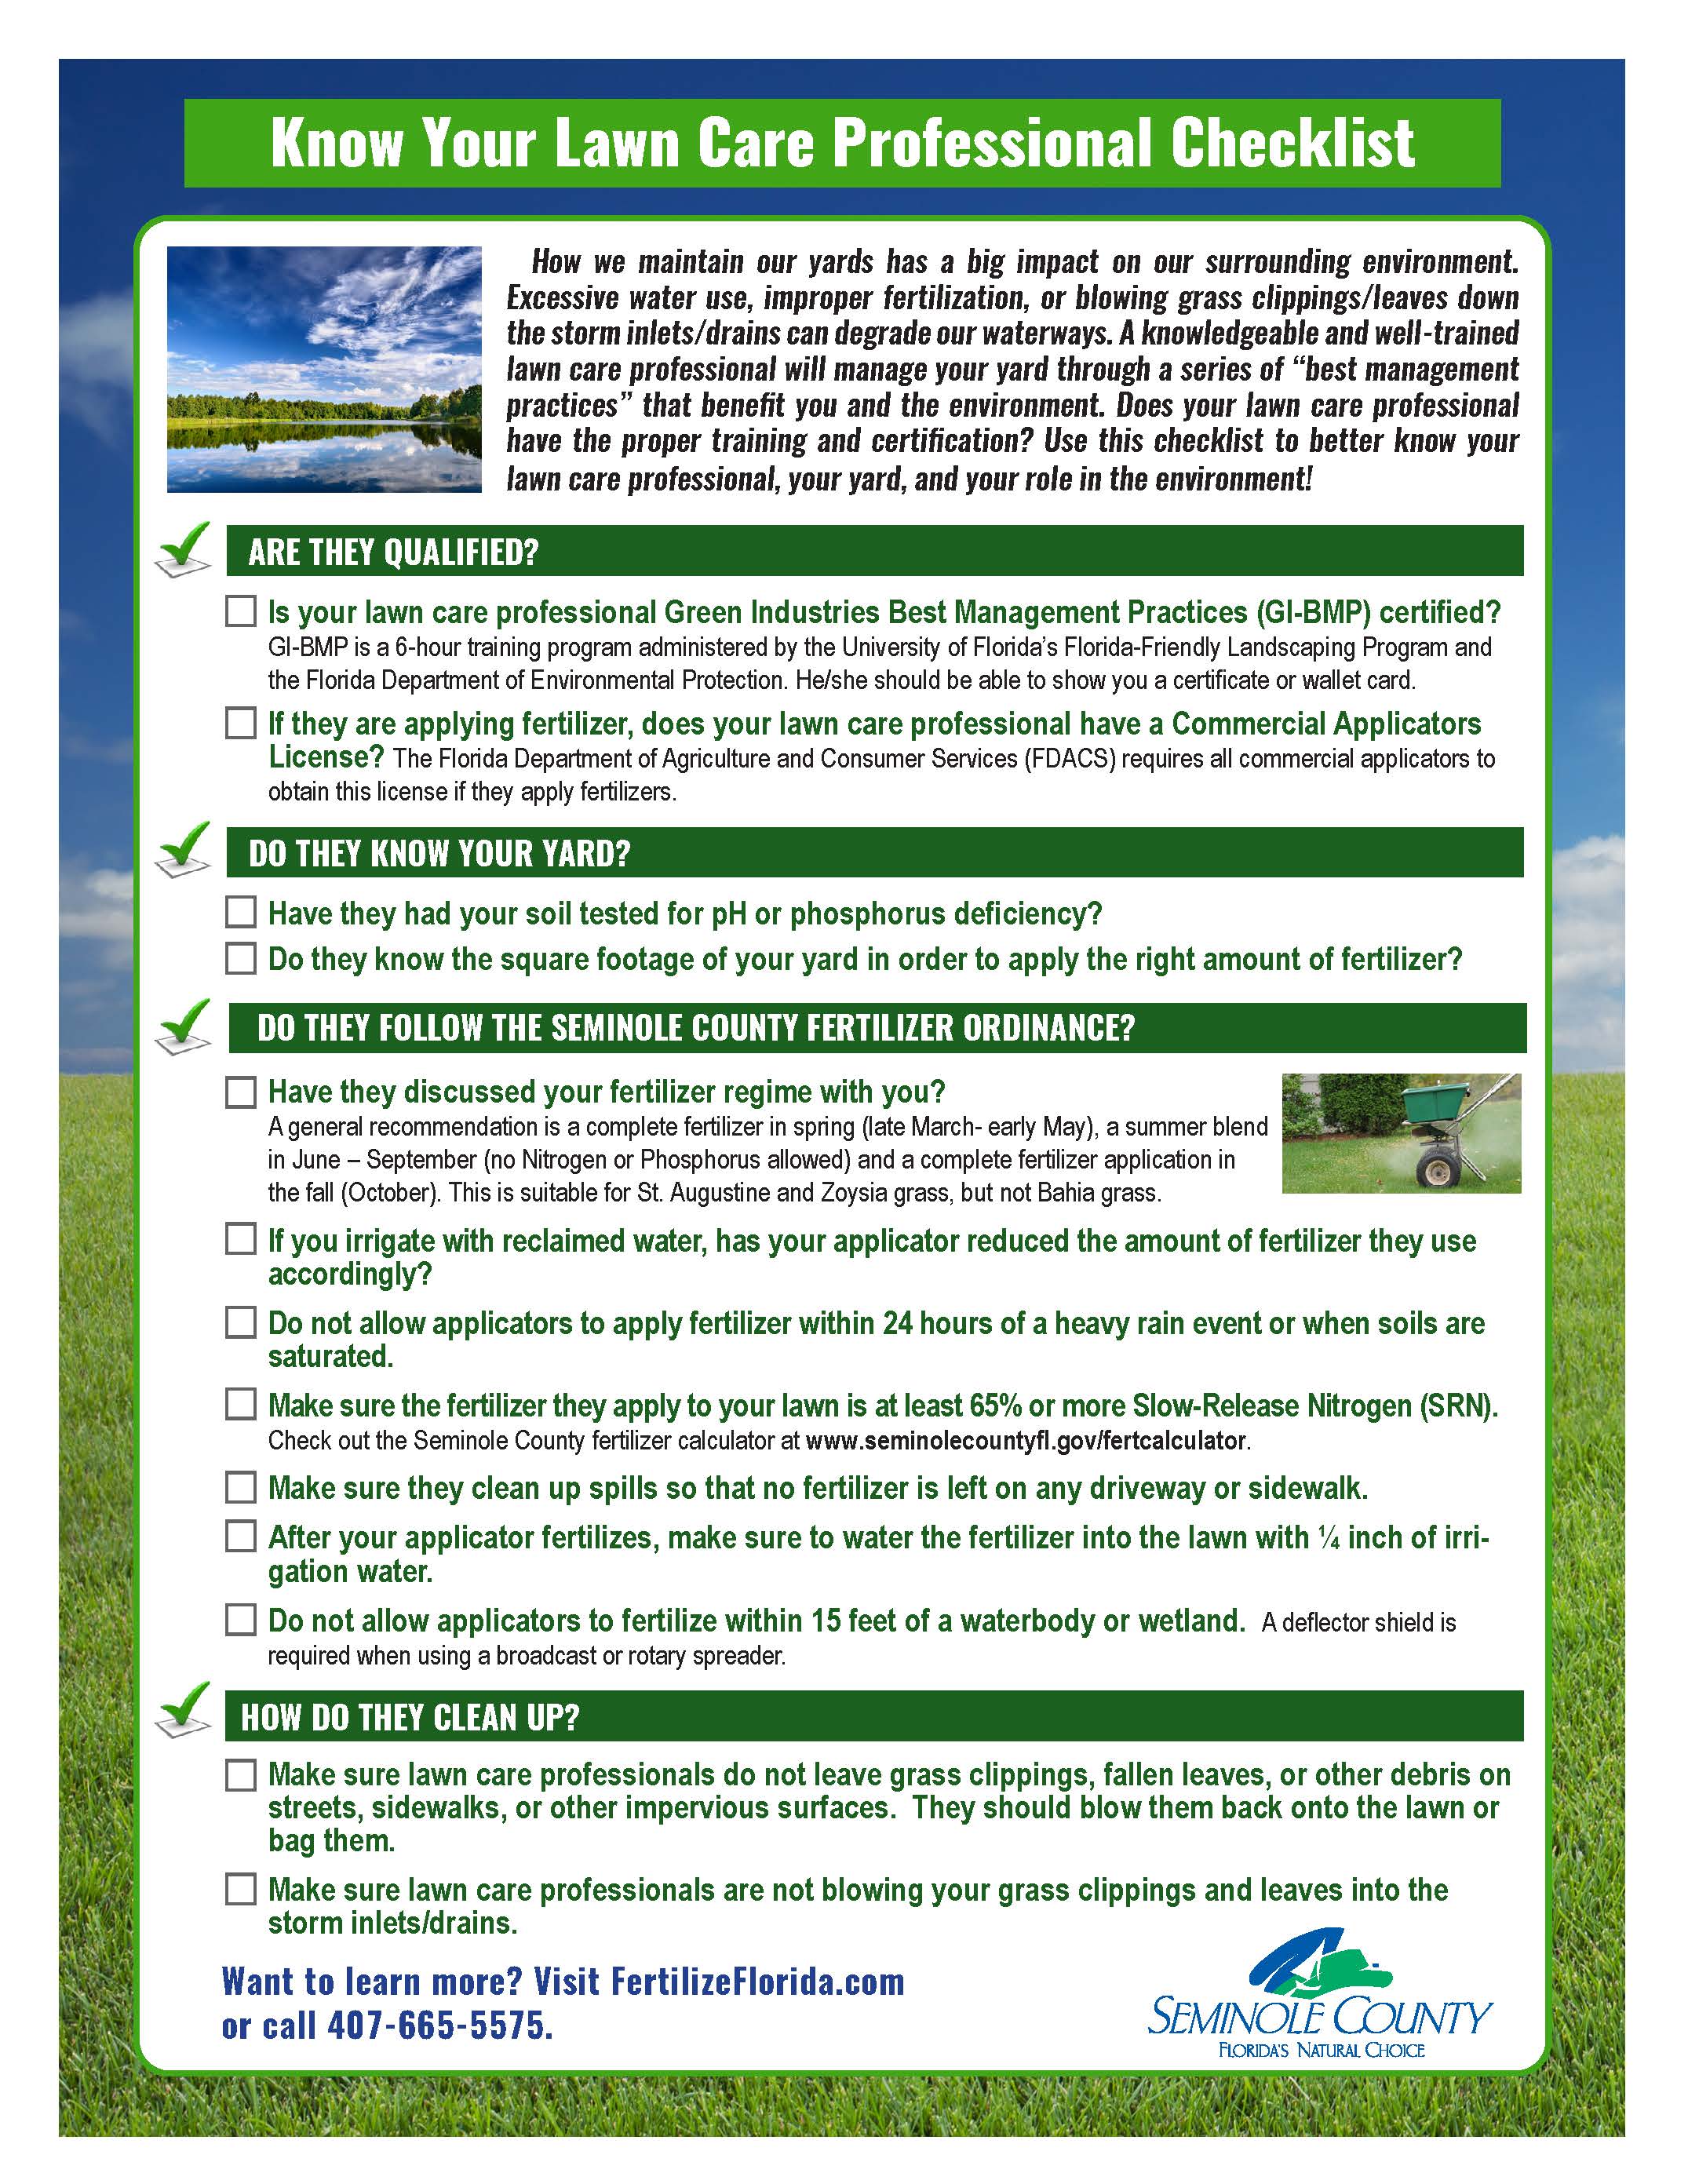 Homeowners - Know your Lawn Care Professional Checklist